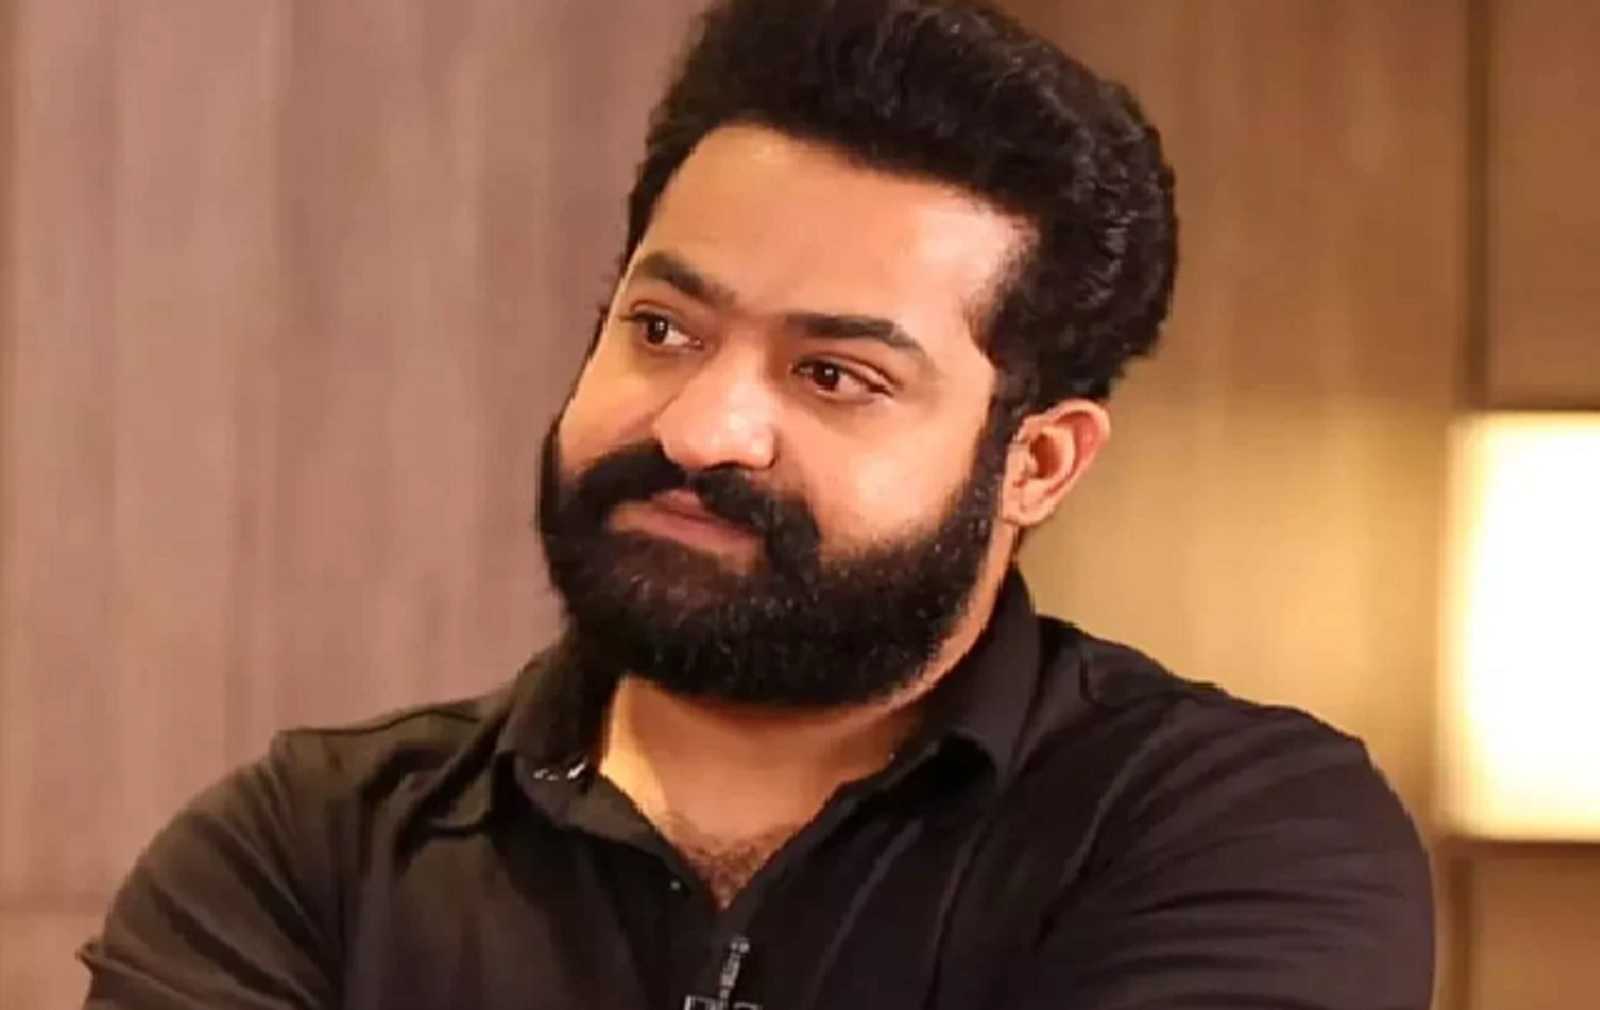 RRR star Jr NTR claims to stop doing movies if further asked about his next projects, clarifies later